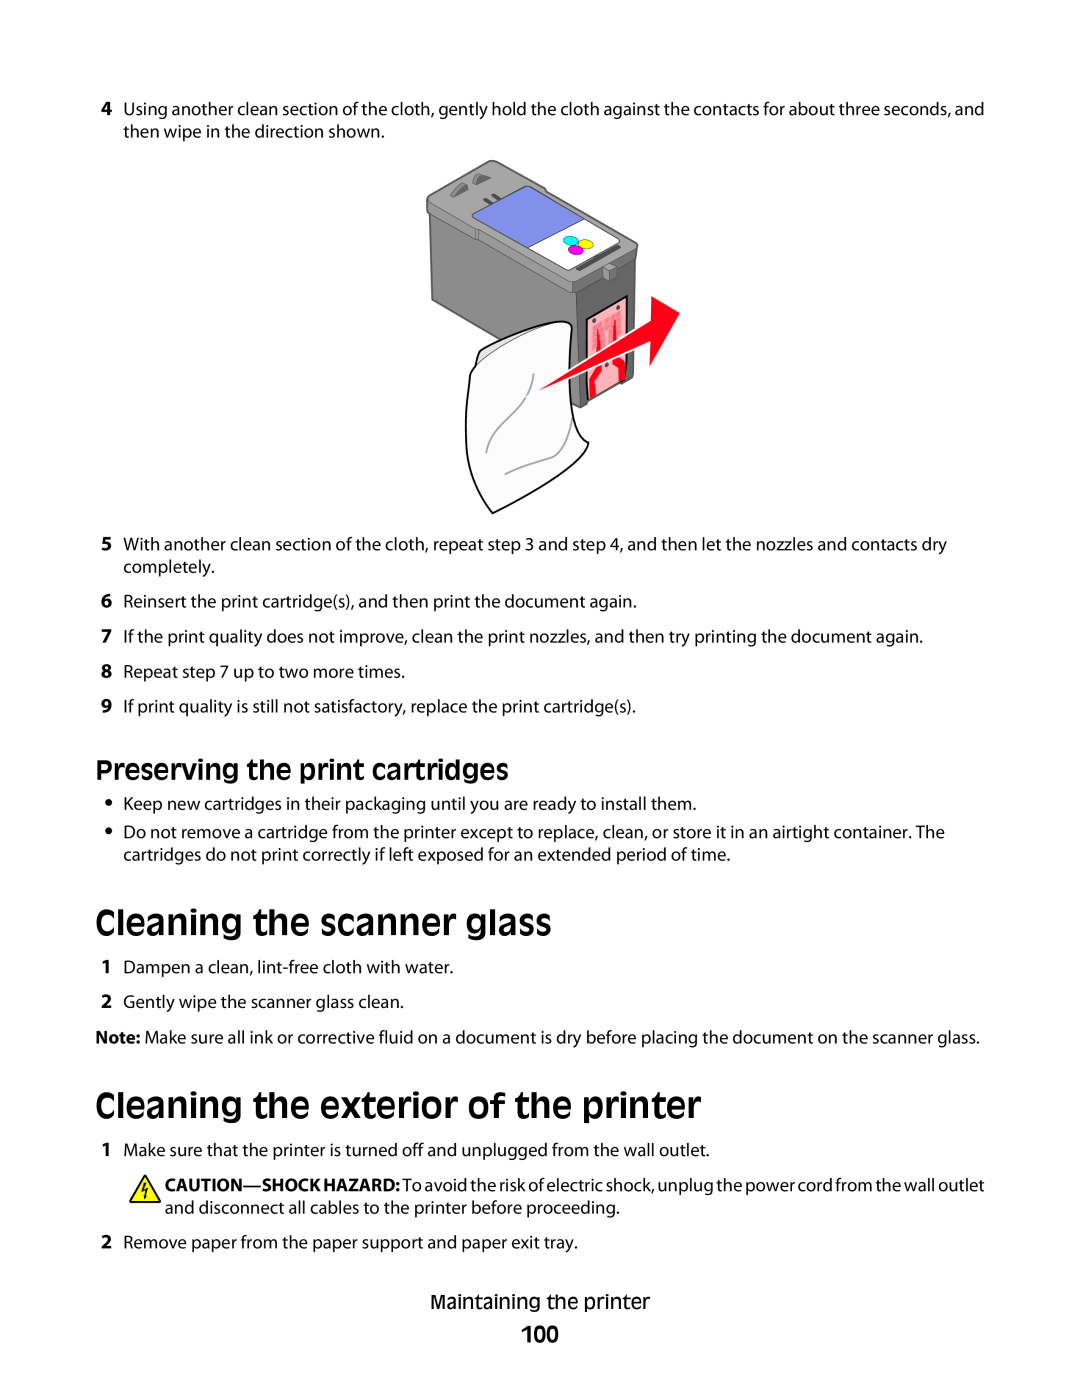 Lexmark 4600, 3600 manual Cleaning the scanner glass, Cleaning the exterior of the printer, Preserving the print cartridges 